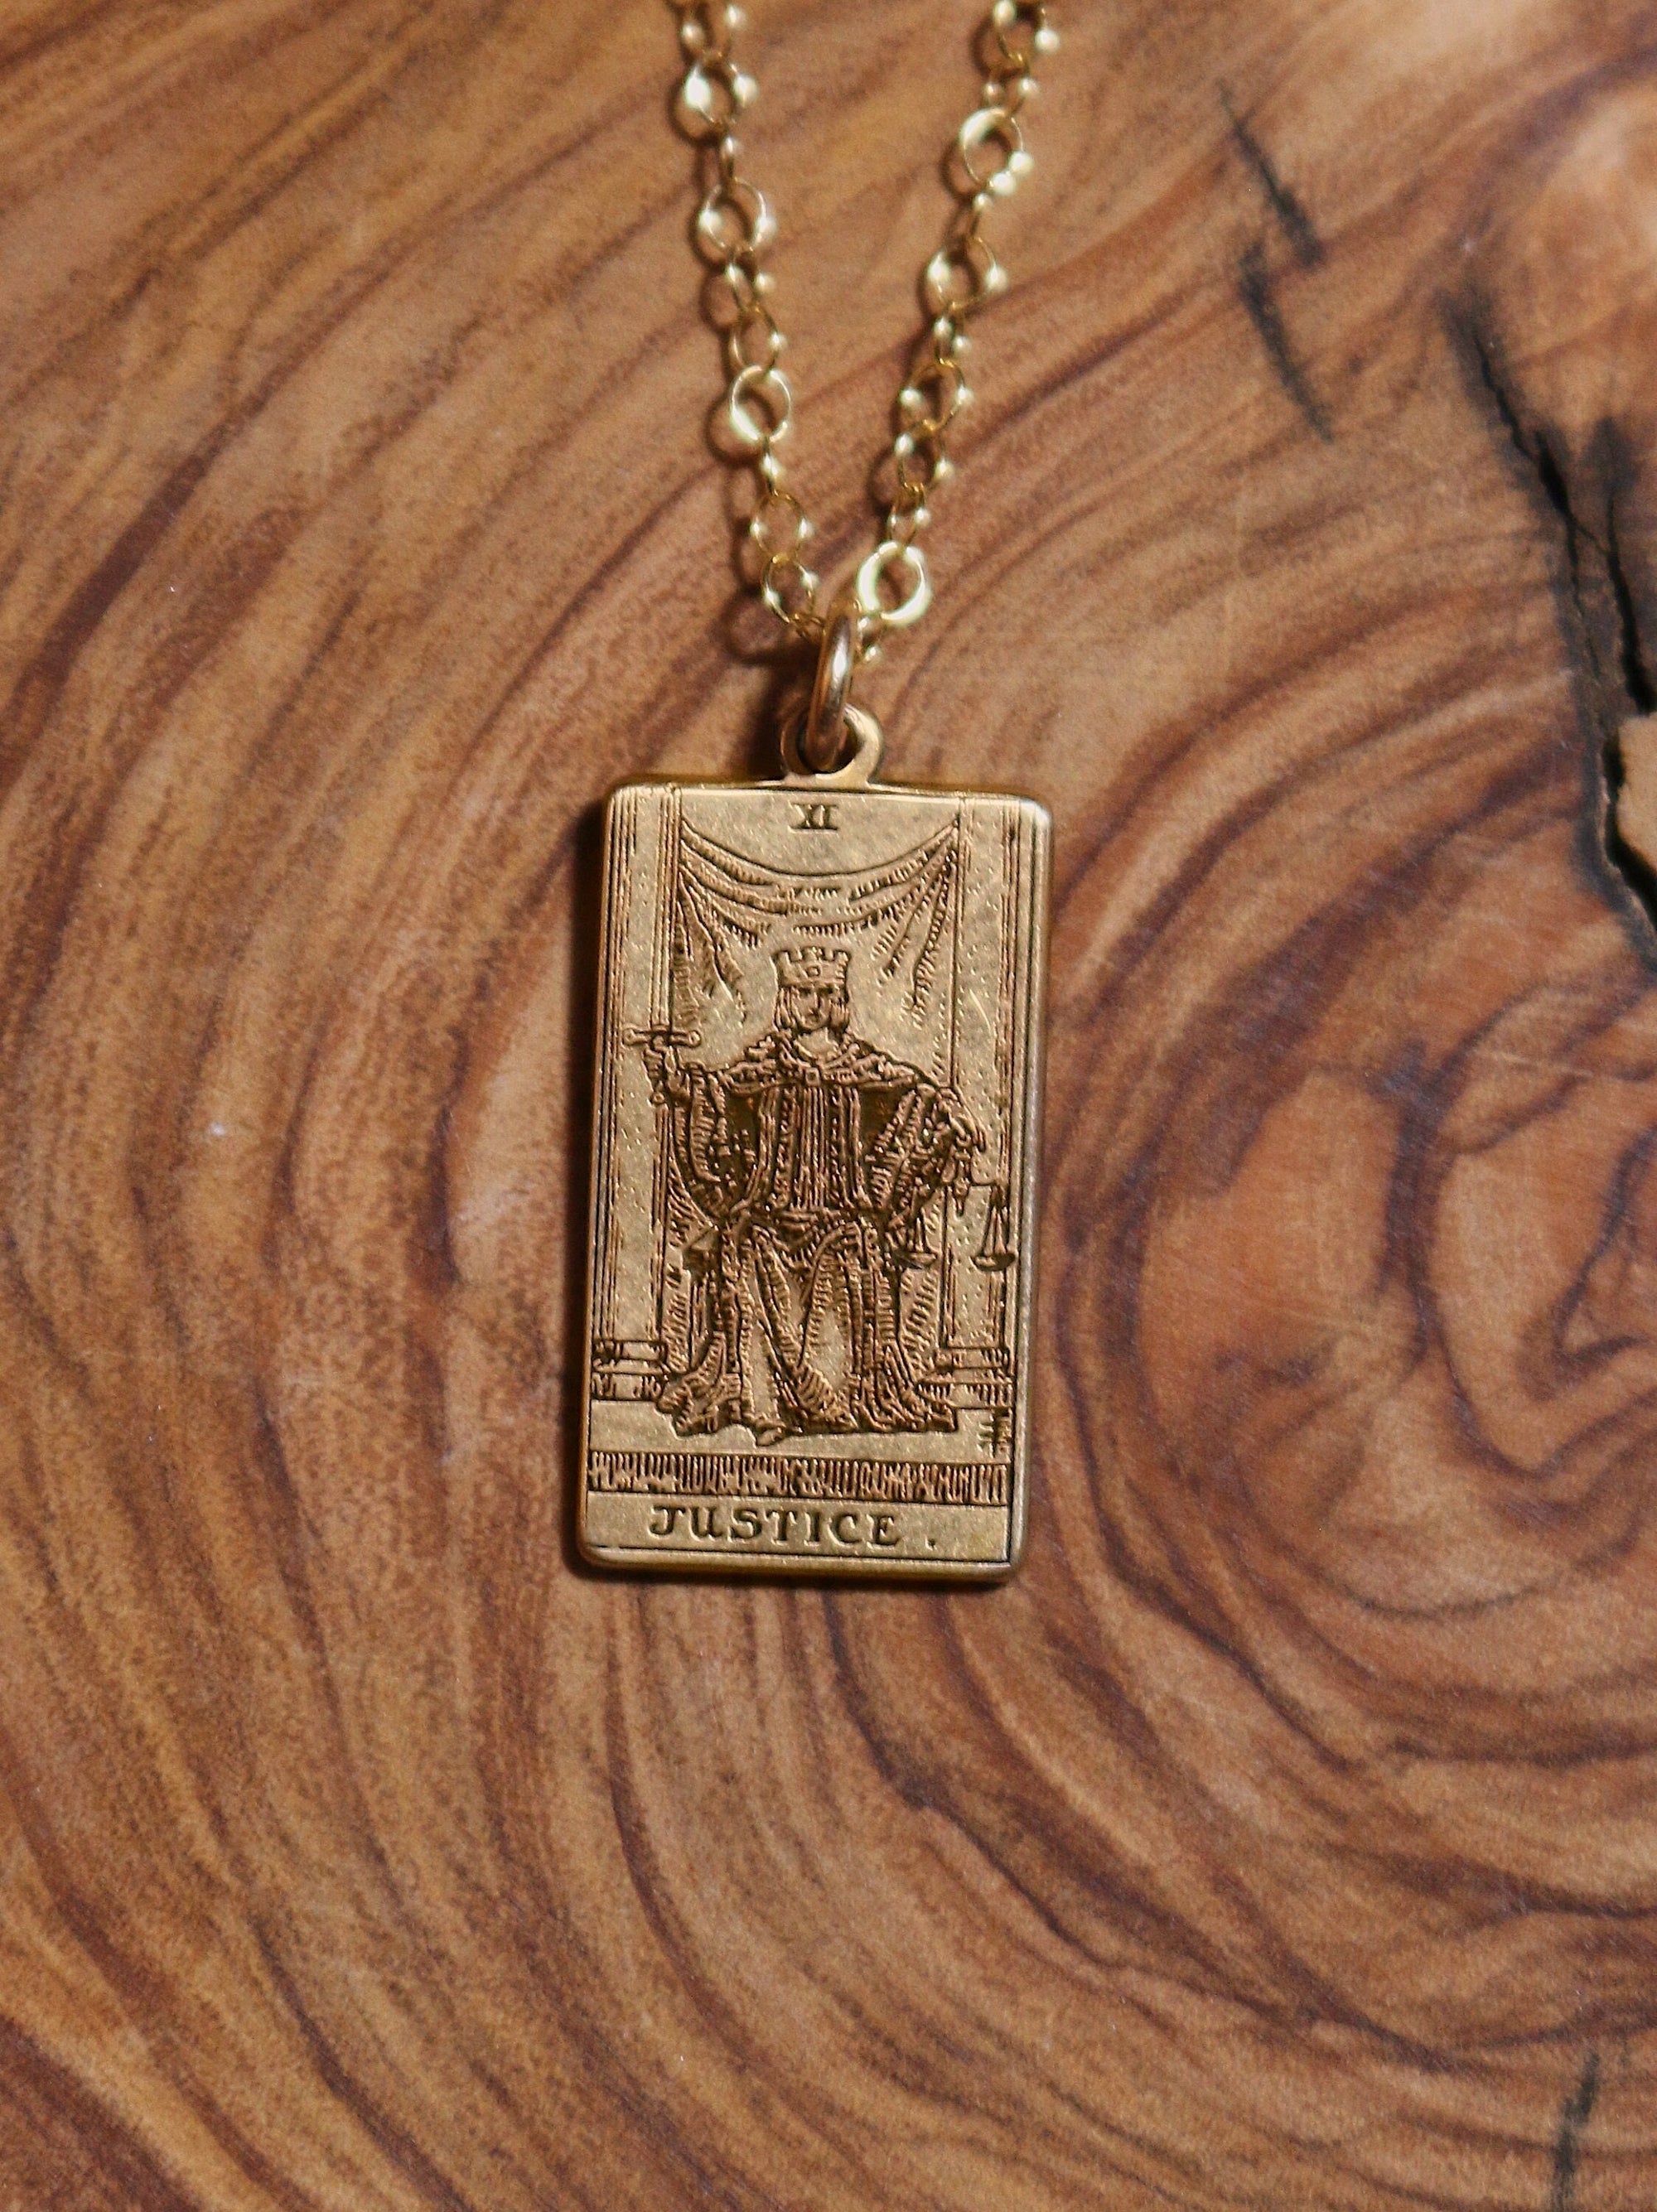 Justice Tarot Card Necklace - Gold Filled